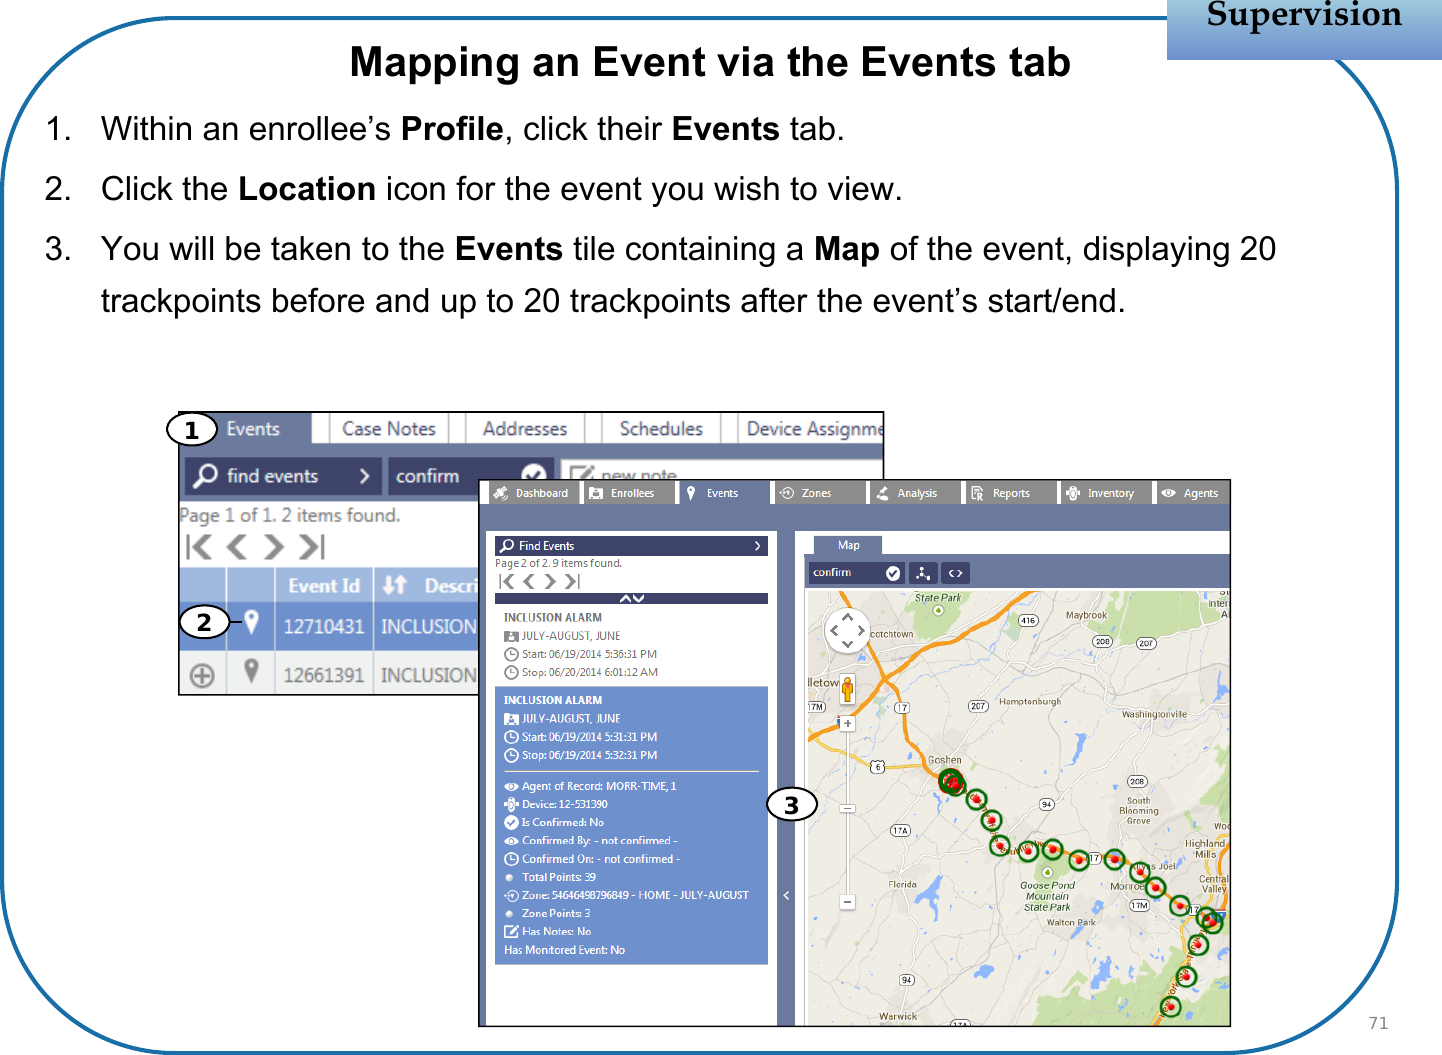 Mapping an Event via the Events tab1. Within an enrollee’s Profile, click their Events tab.2. Click the Location icon for the event you wish to view. 3. You will be taken to the Events tile containing a Map of the event, displaying 20 trackpoints before and up to 20 trackpoints after the event’s start/end.SupervisionSupervision71213